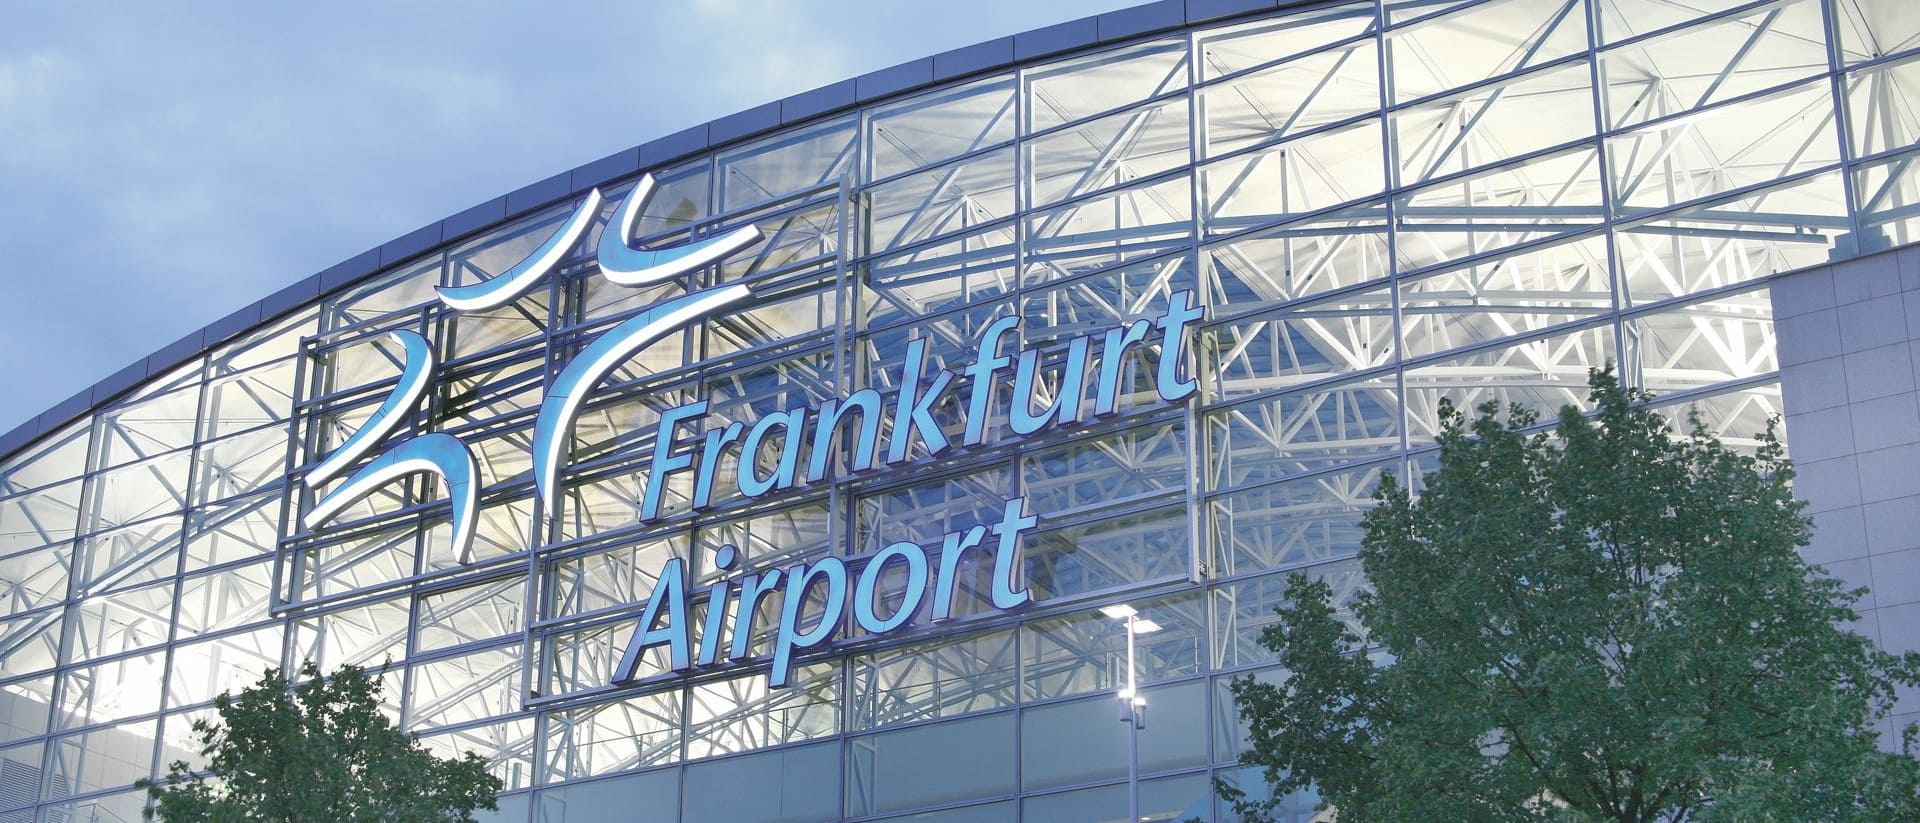 Fraport AG is one of the leading international companies in the airport business and is based at almost 30 airports on four continents.